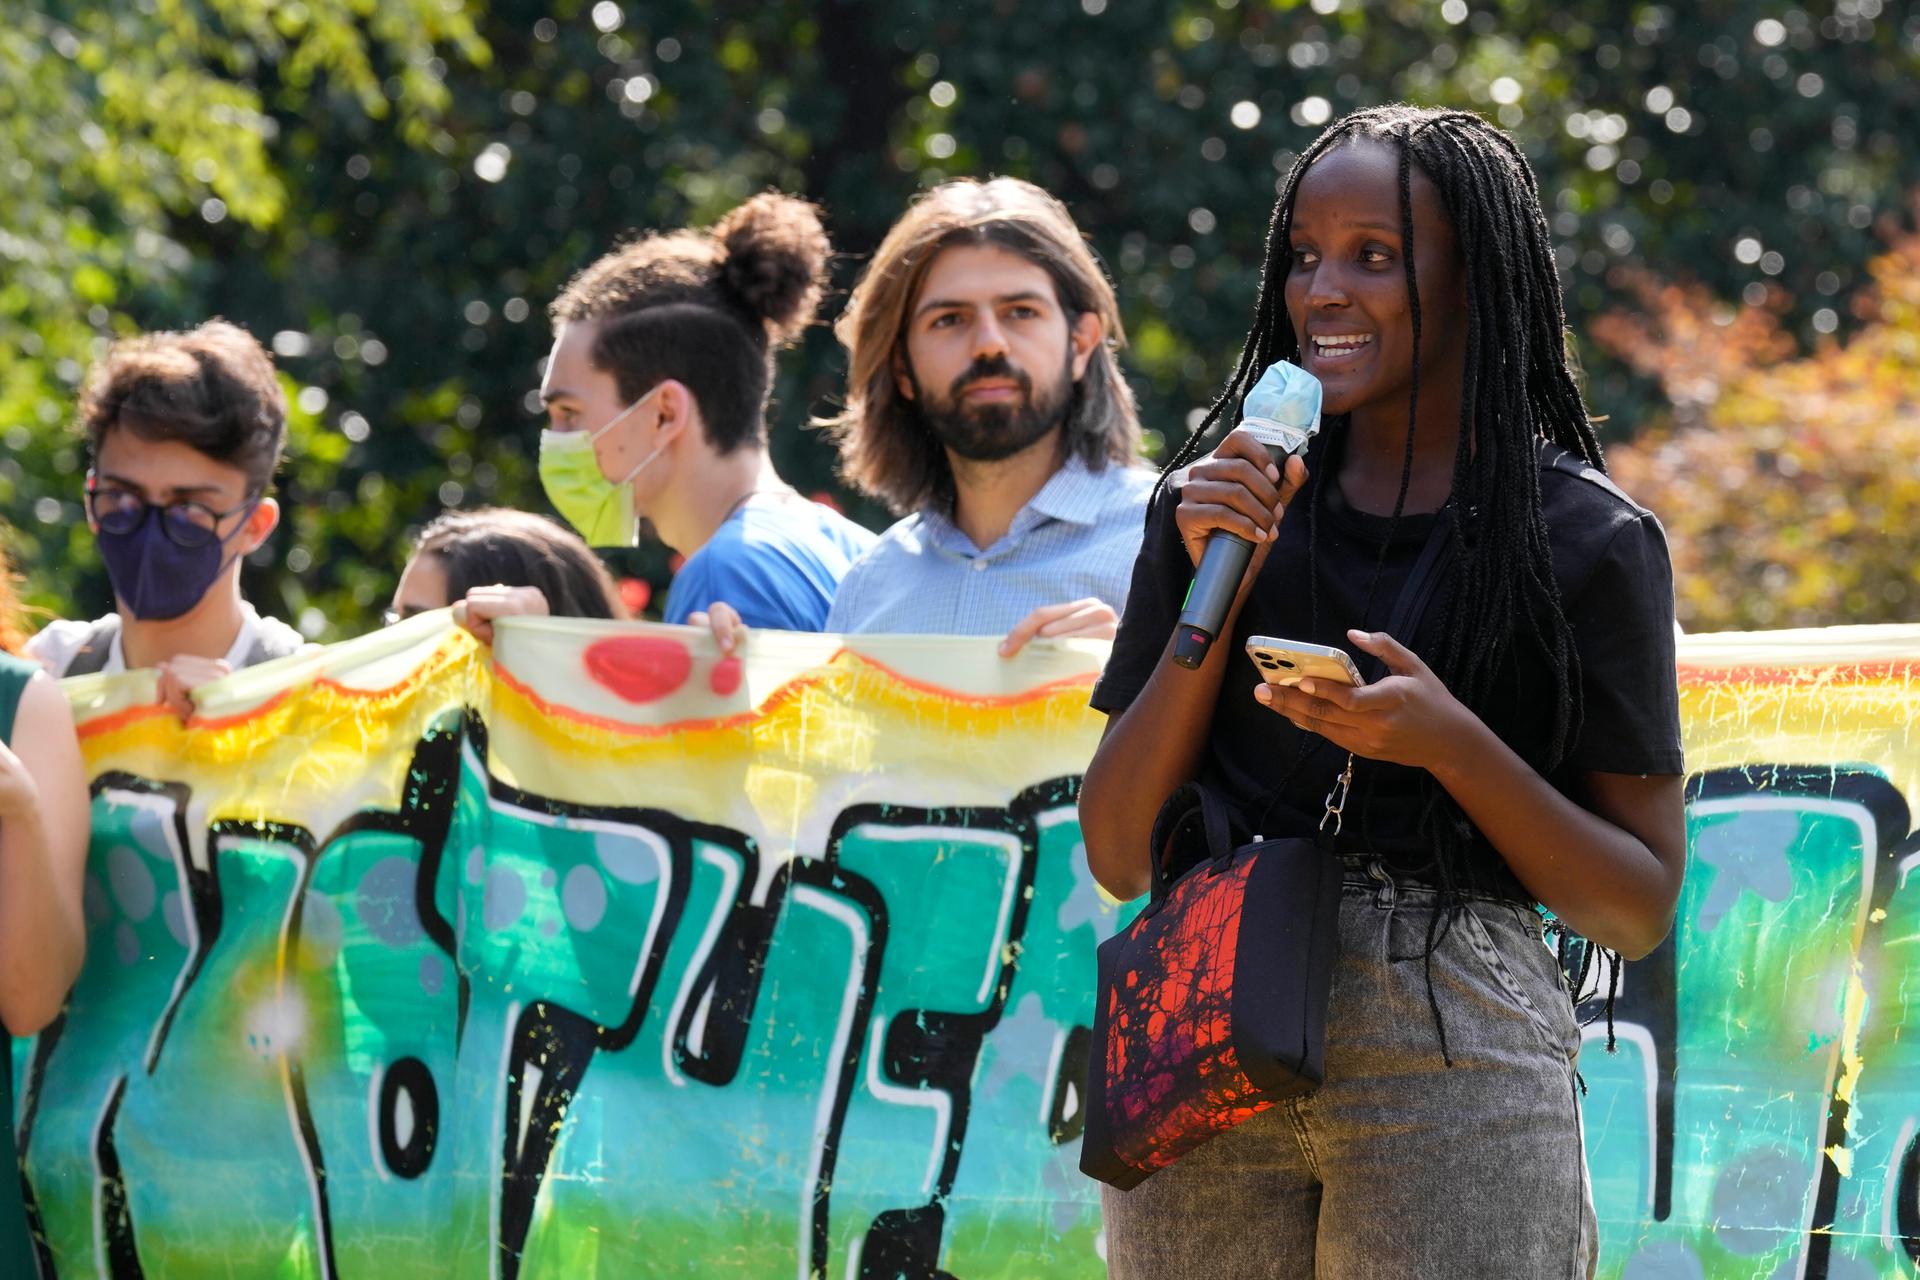 Climate activist Vanessa Nakate, of Uganda, delivers her speech during a Fridays for Future demonstration in Milan, Italy, Friday, Oct. 1, 2021.